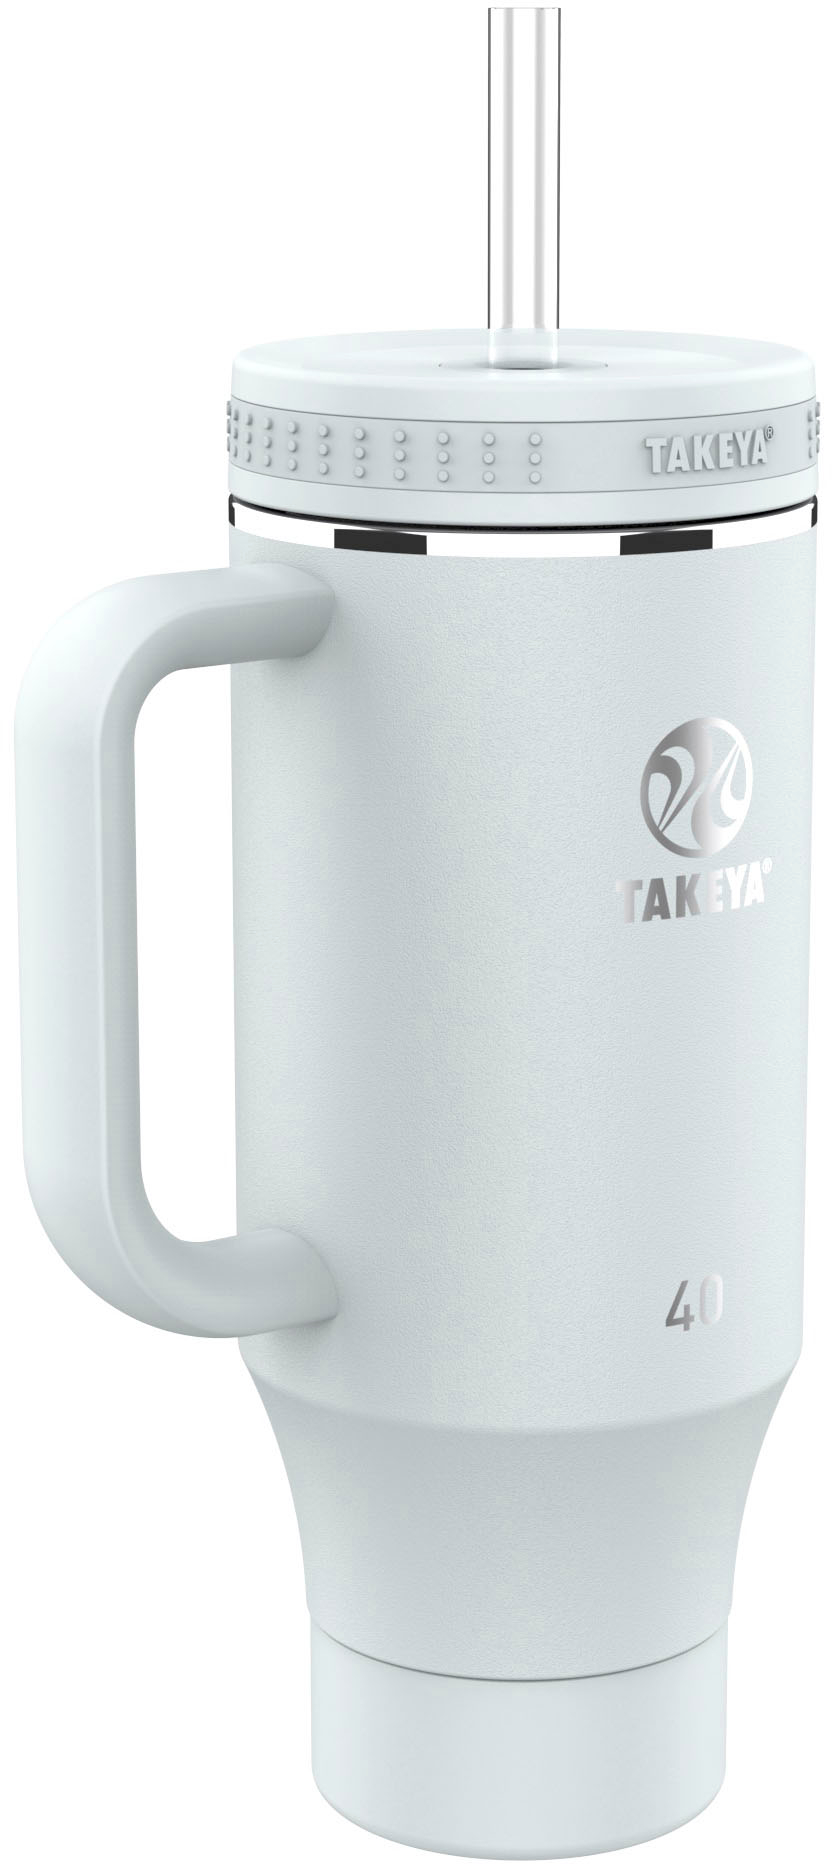 Takeya Actives 20-Oz. Insulated Stainless Steel Tumbler  - Best Buy